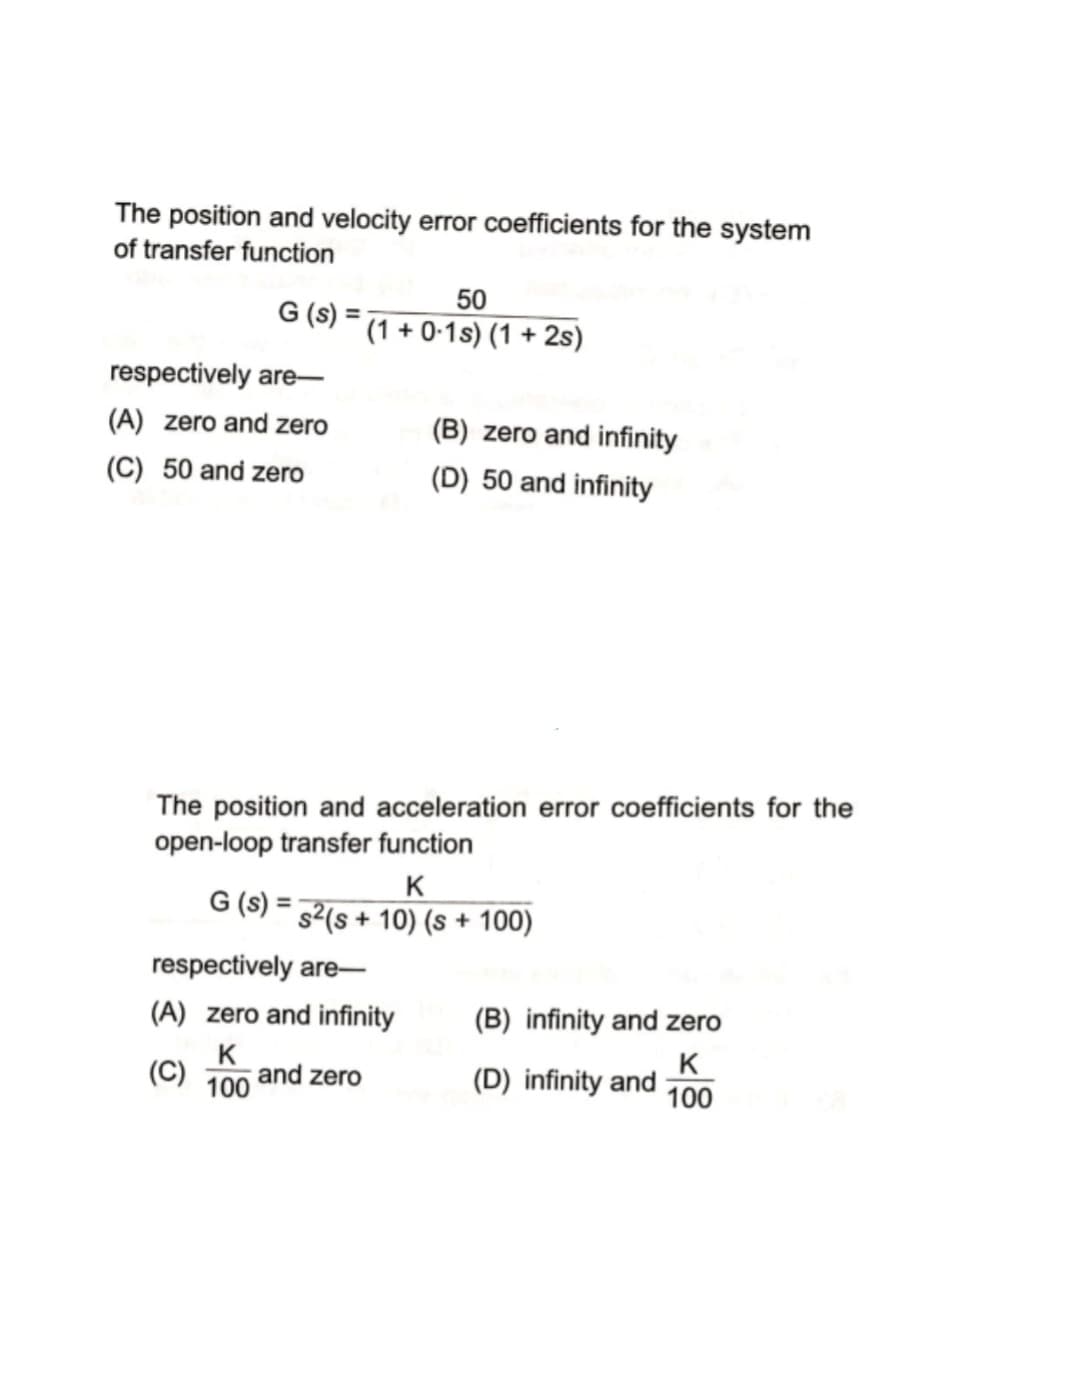 The position and velocity error coefficients for the system
of transfer function
50
G (s) = (1 + 0-1s) (1 + 2s)
respectively are-
(A) zero and zero
(B) zero and infinity
(C) 50 and zero
(D) 50 and infinity
The position and acceleration error coefficients for the
open-loop transfer function
K
G (s) = 32(s + 10) (s + 100)
respectively are-
(A) zero and infinity
(B) infinity and zero
K
100
K
(D) infinity and 100
(C)
and zero
